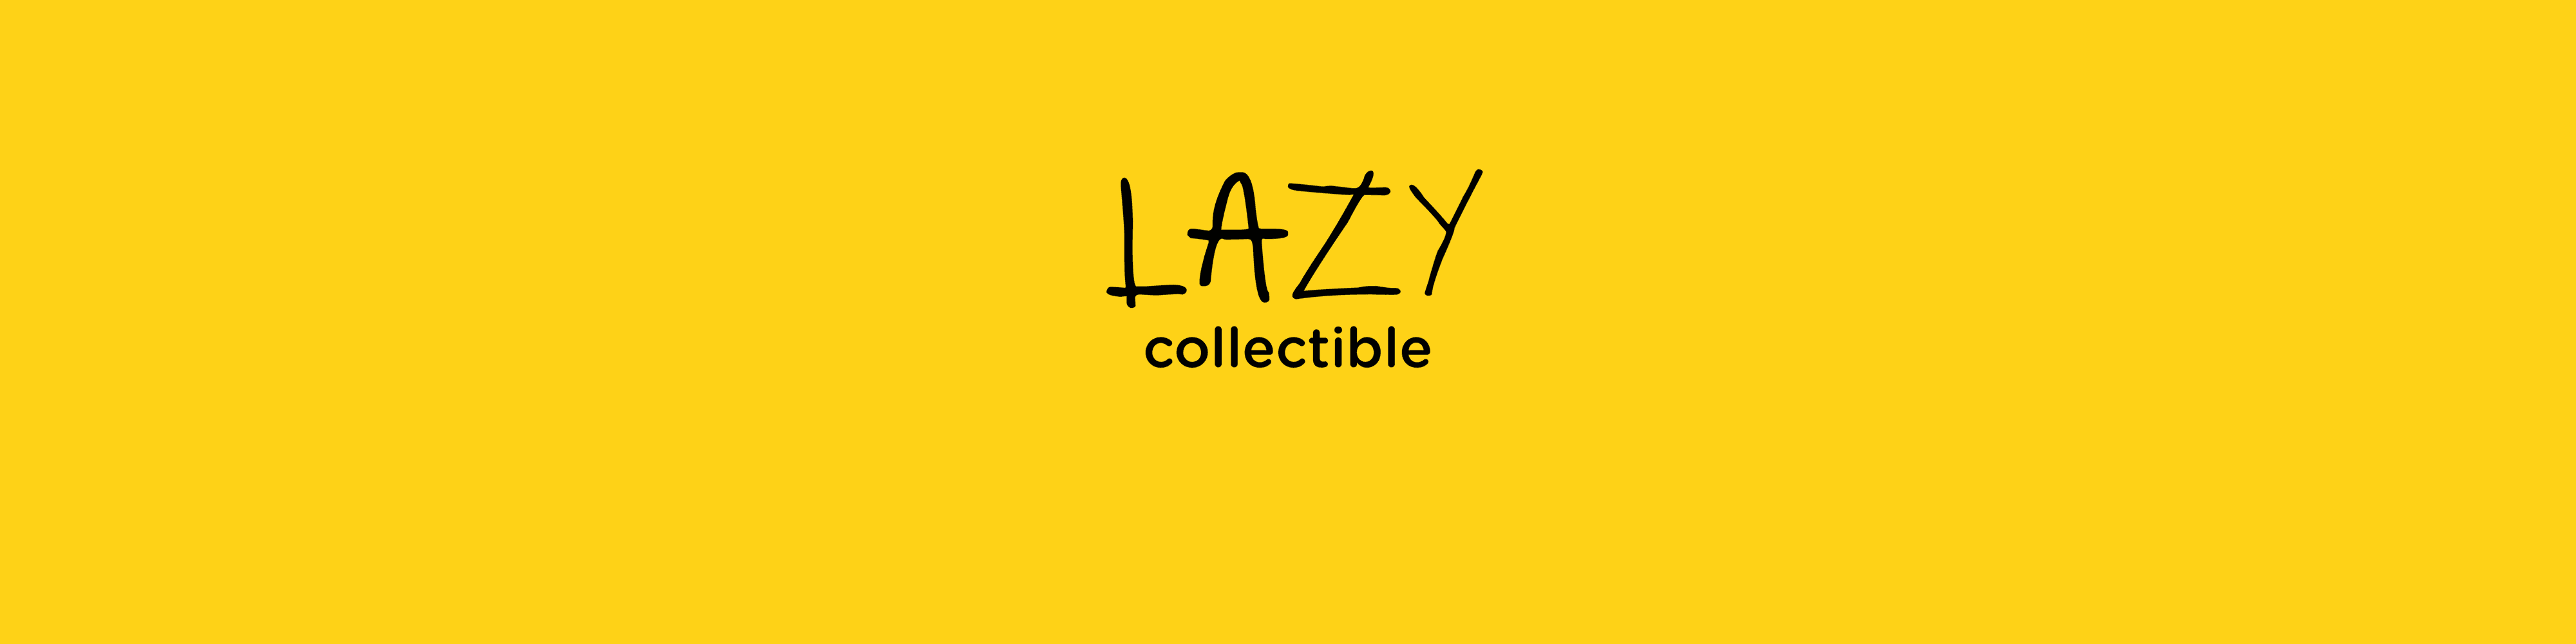 lazycollectible banner